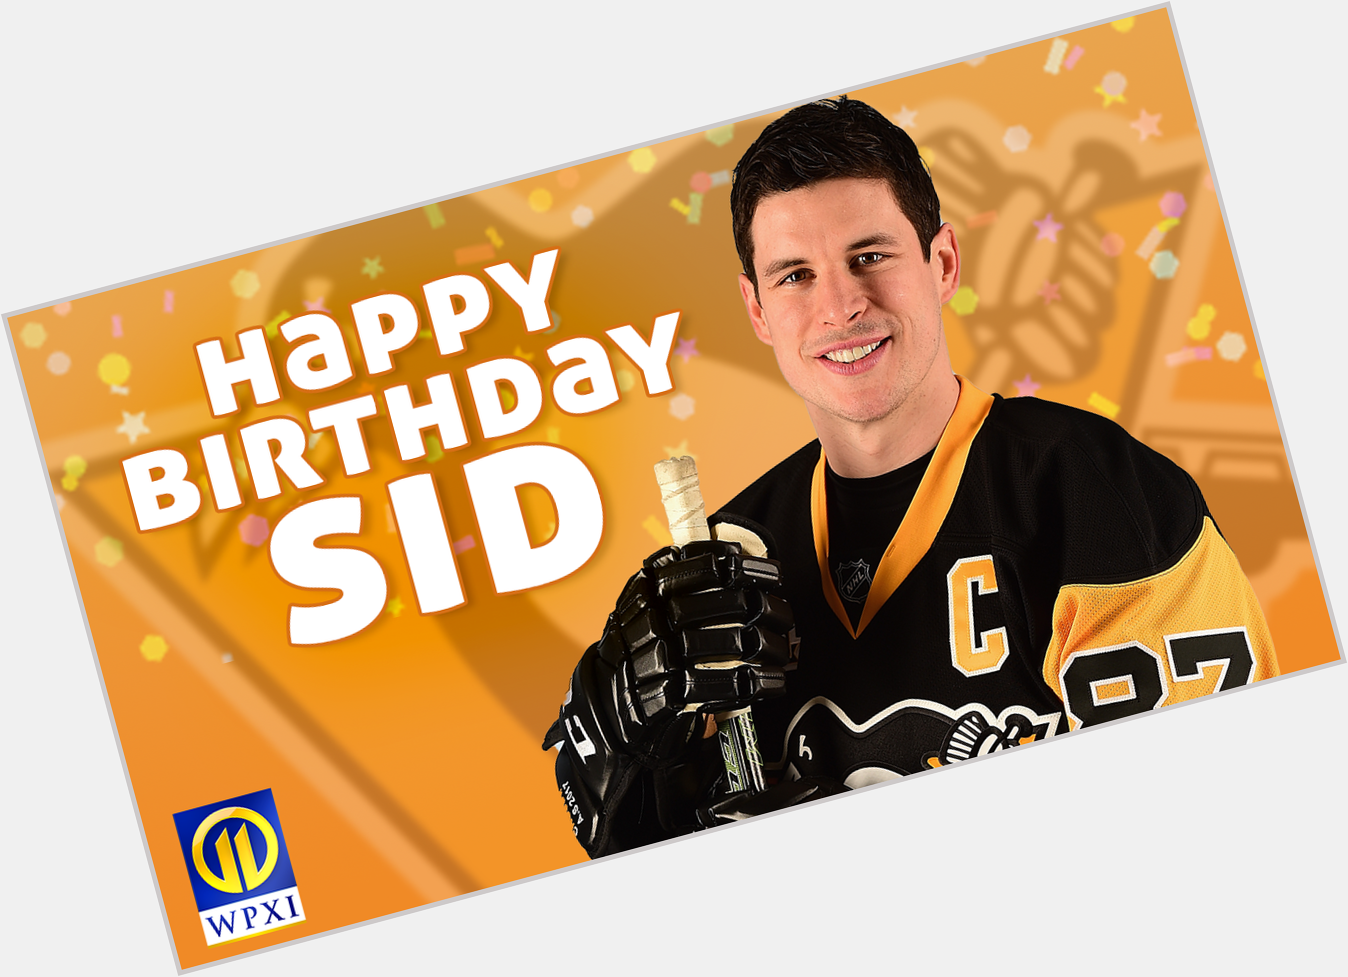    HAPPY BIRTHDAY, Sidney Crosby! Celebrate with a win for the this afternoon?  